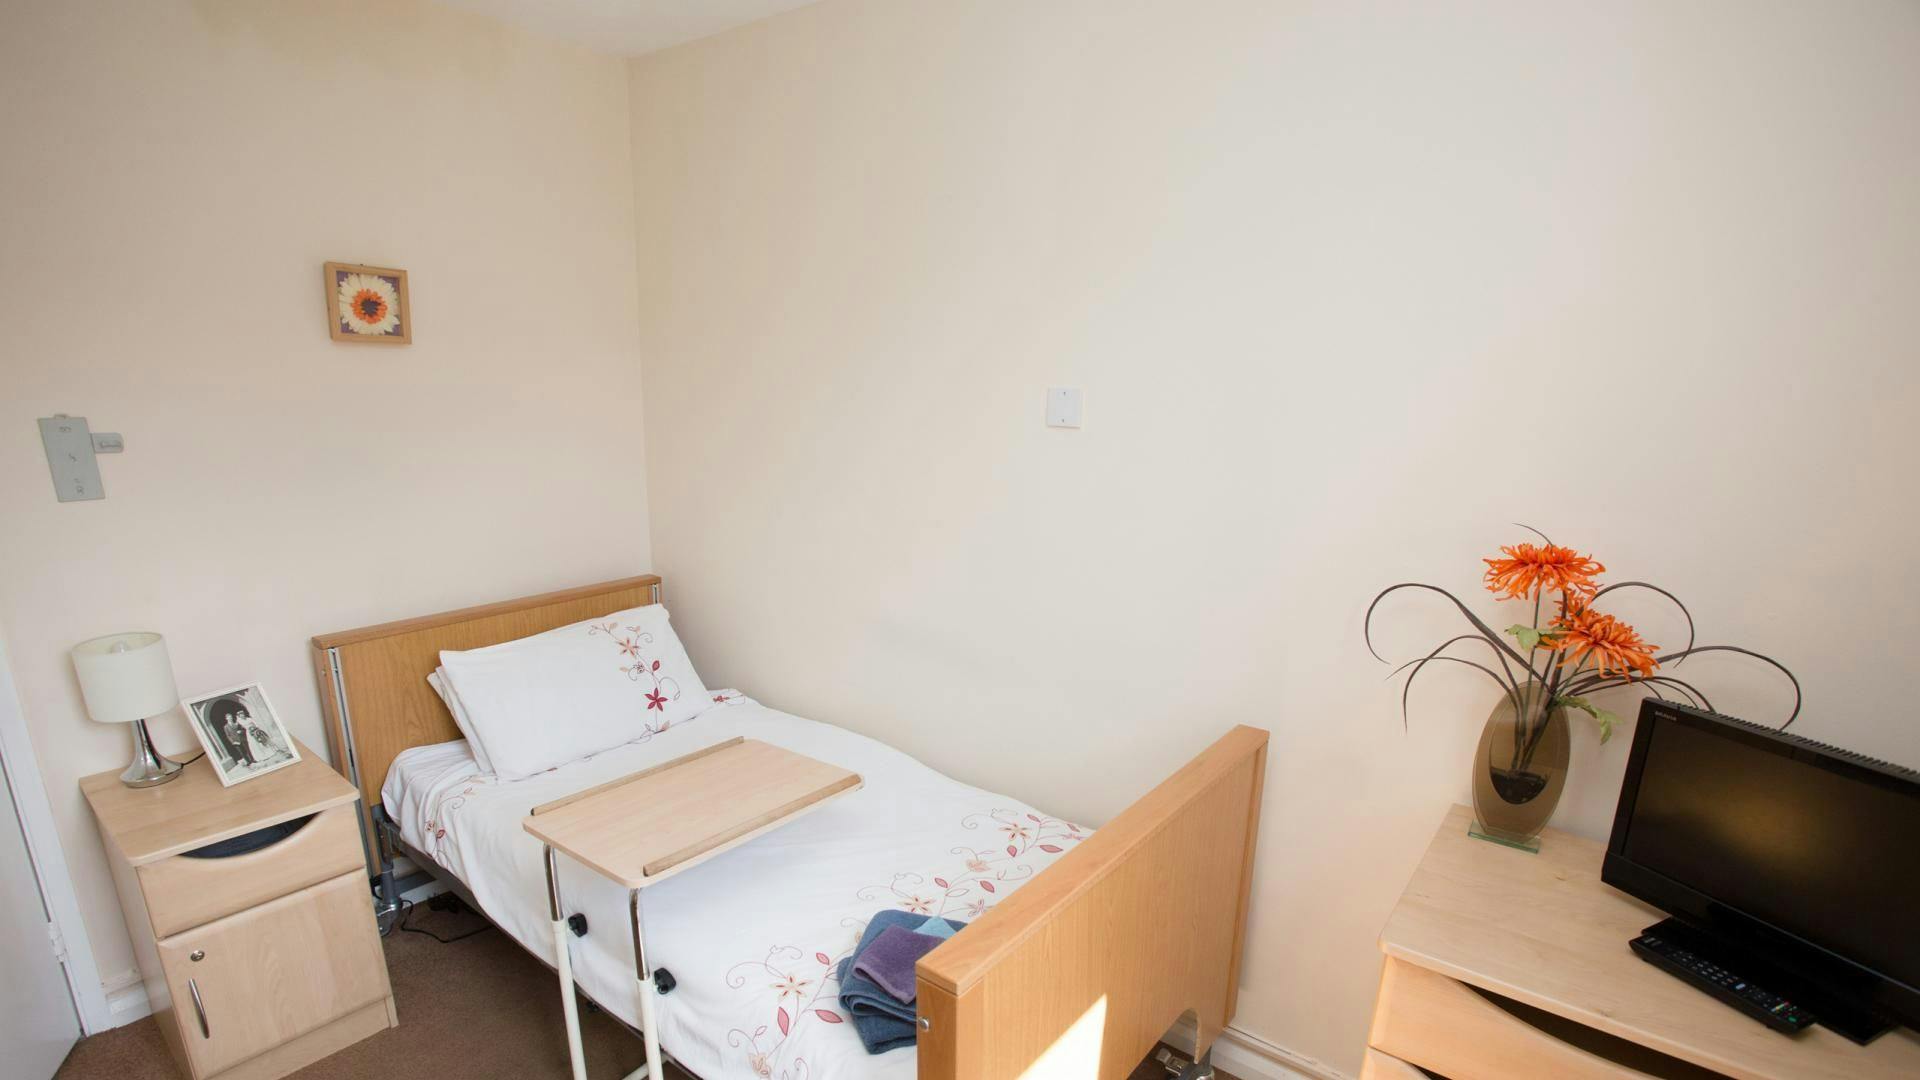 Bedroom at Ridgeway House Care Home in Swindon,Wiltshire